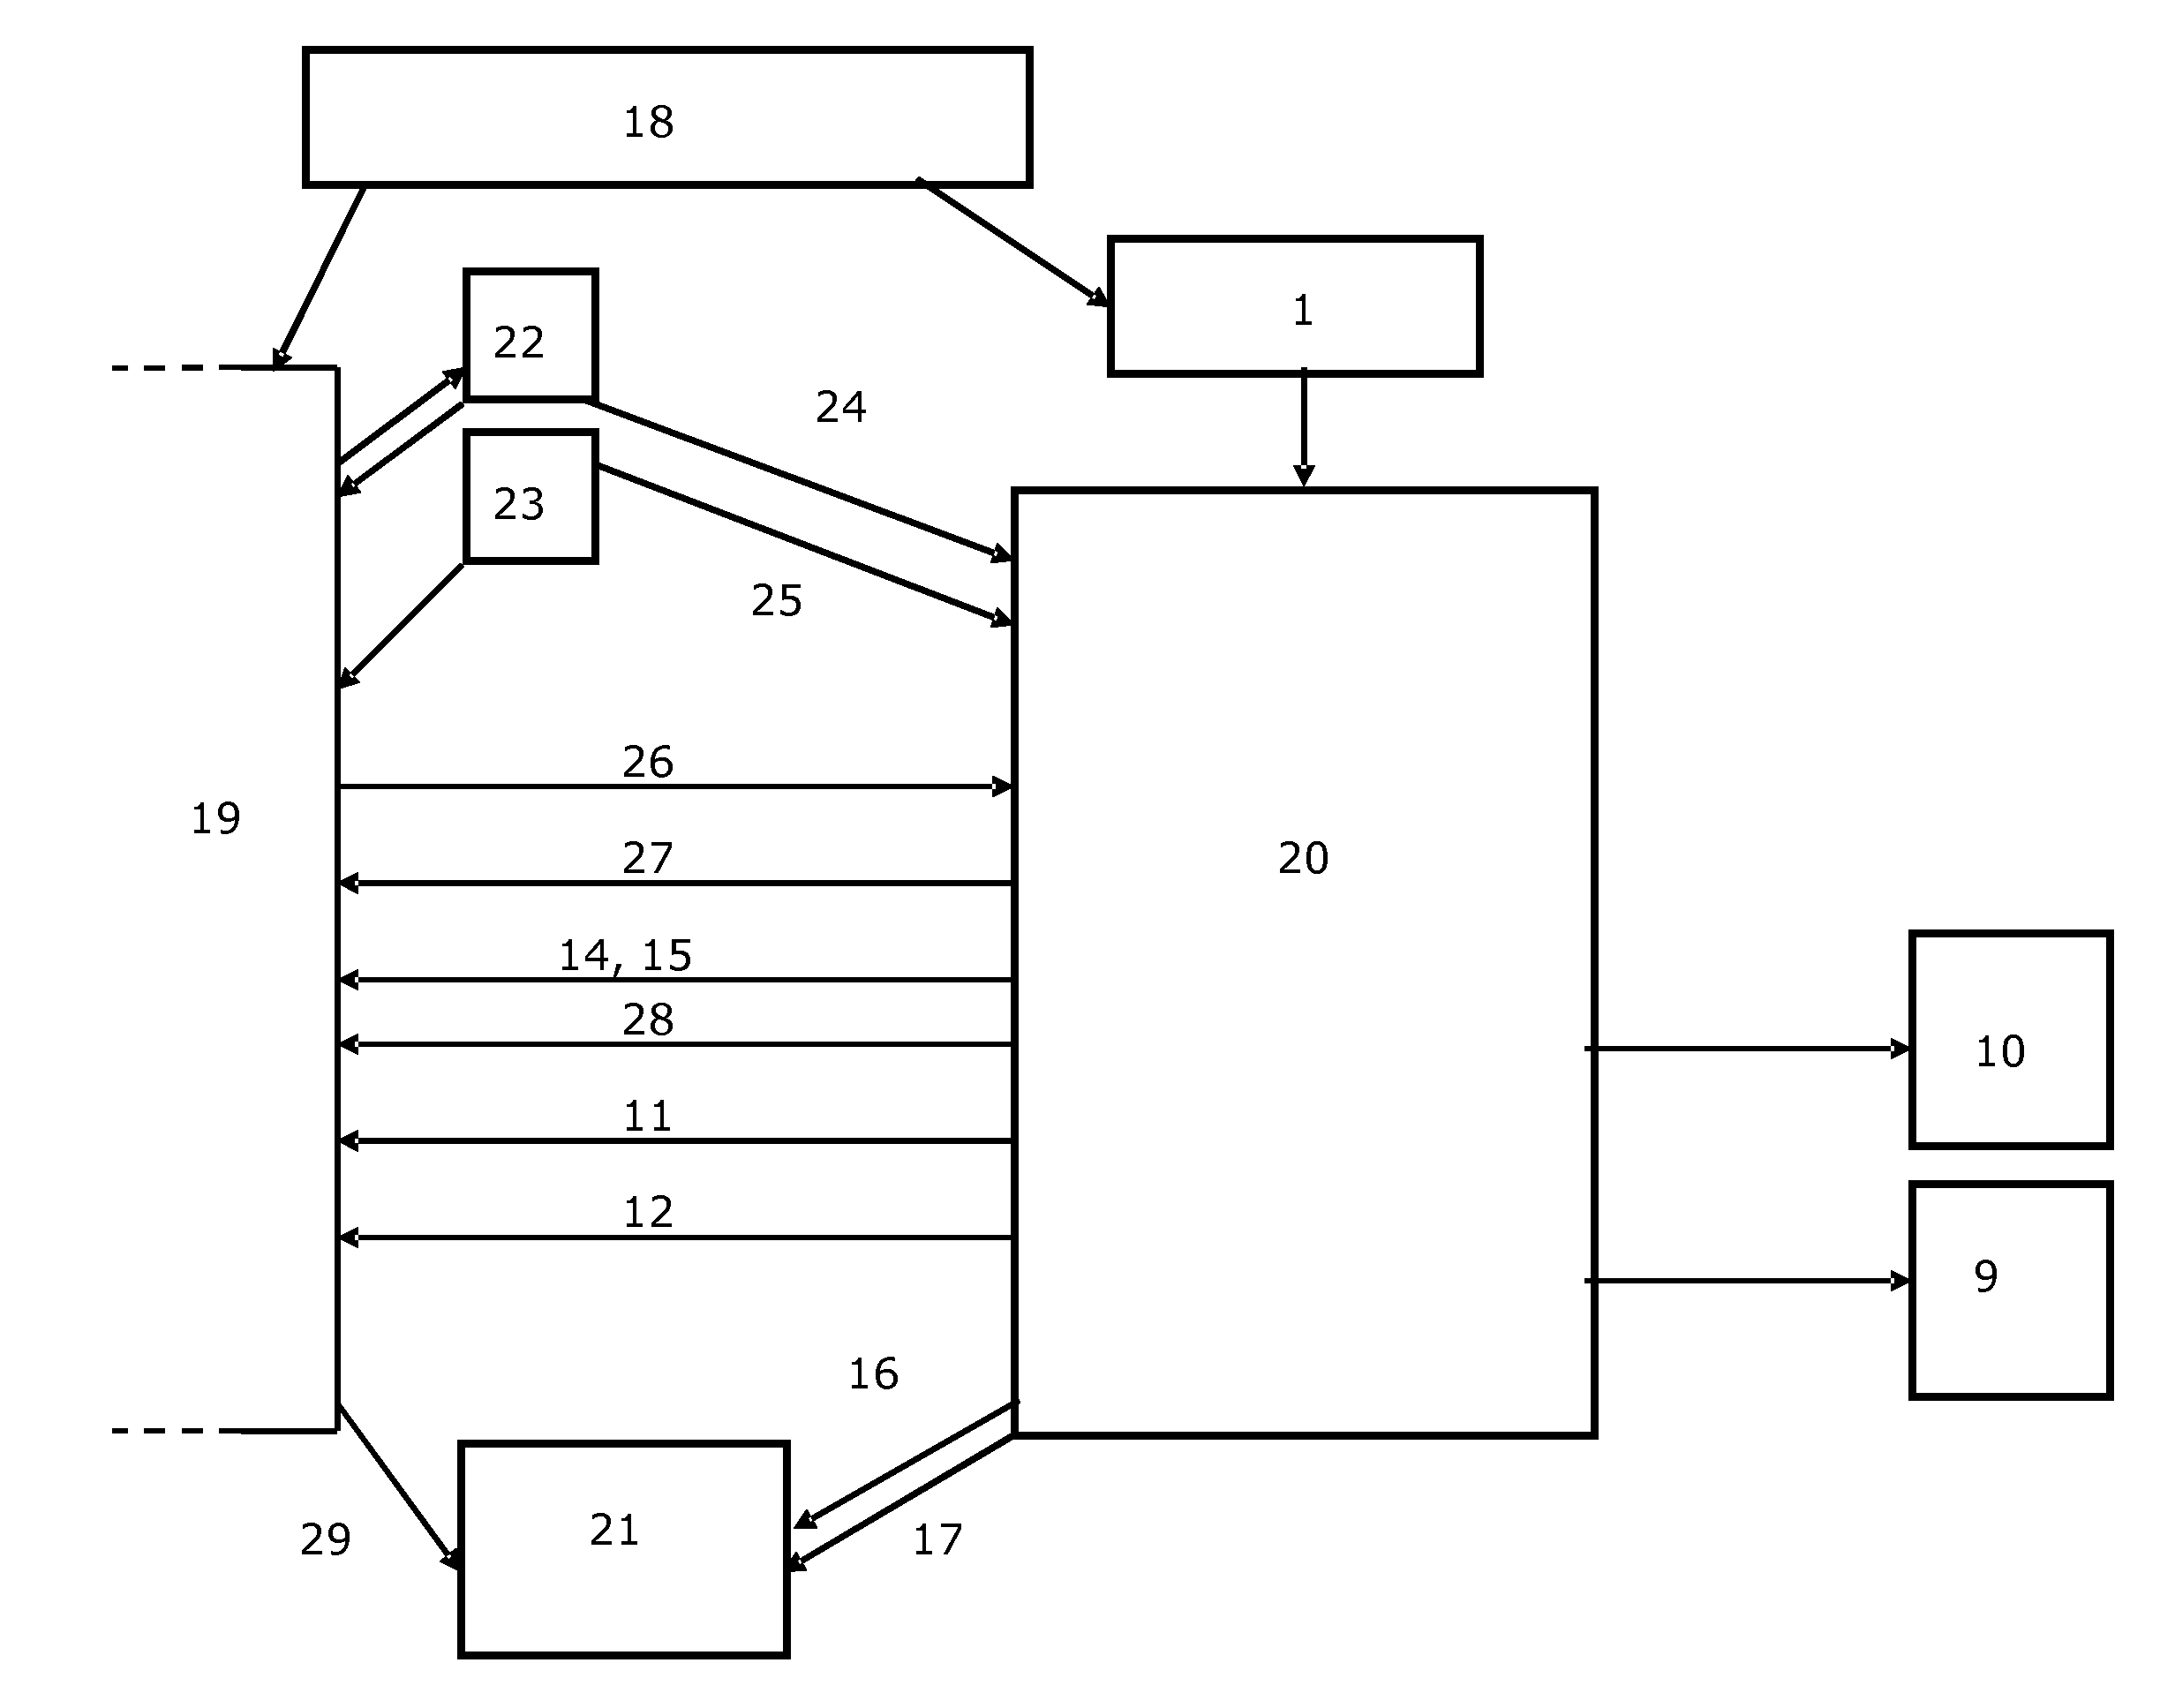 Waste water treatment from a biomass-to-liquid process comprising synthesis gas production and integrated factory facility